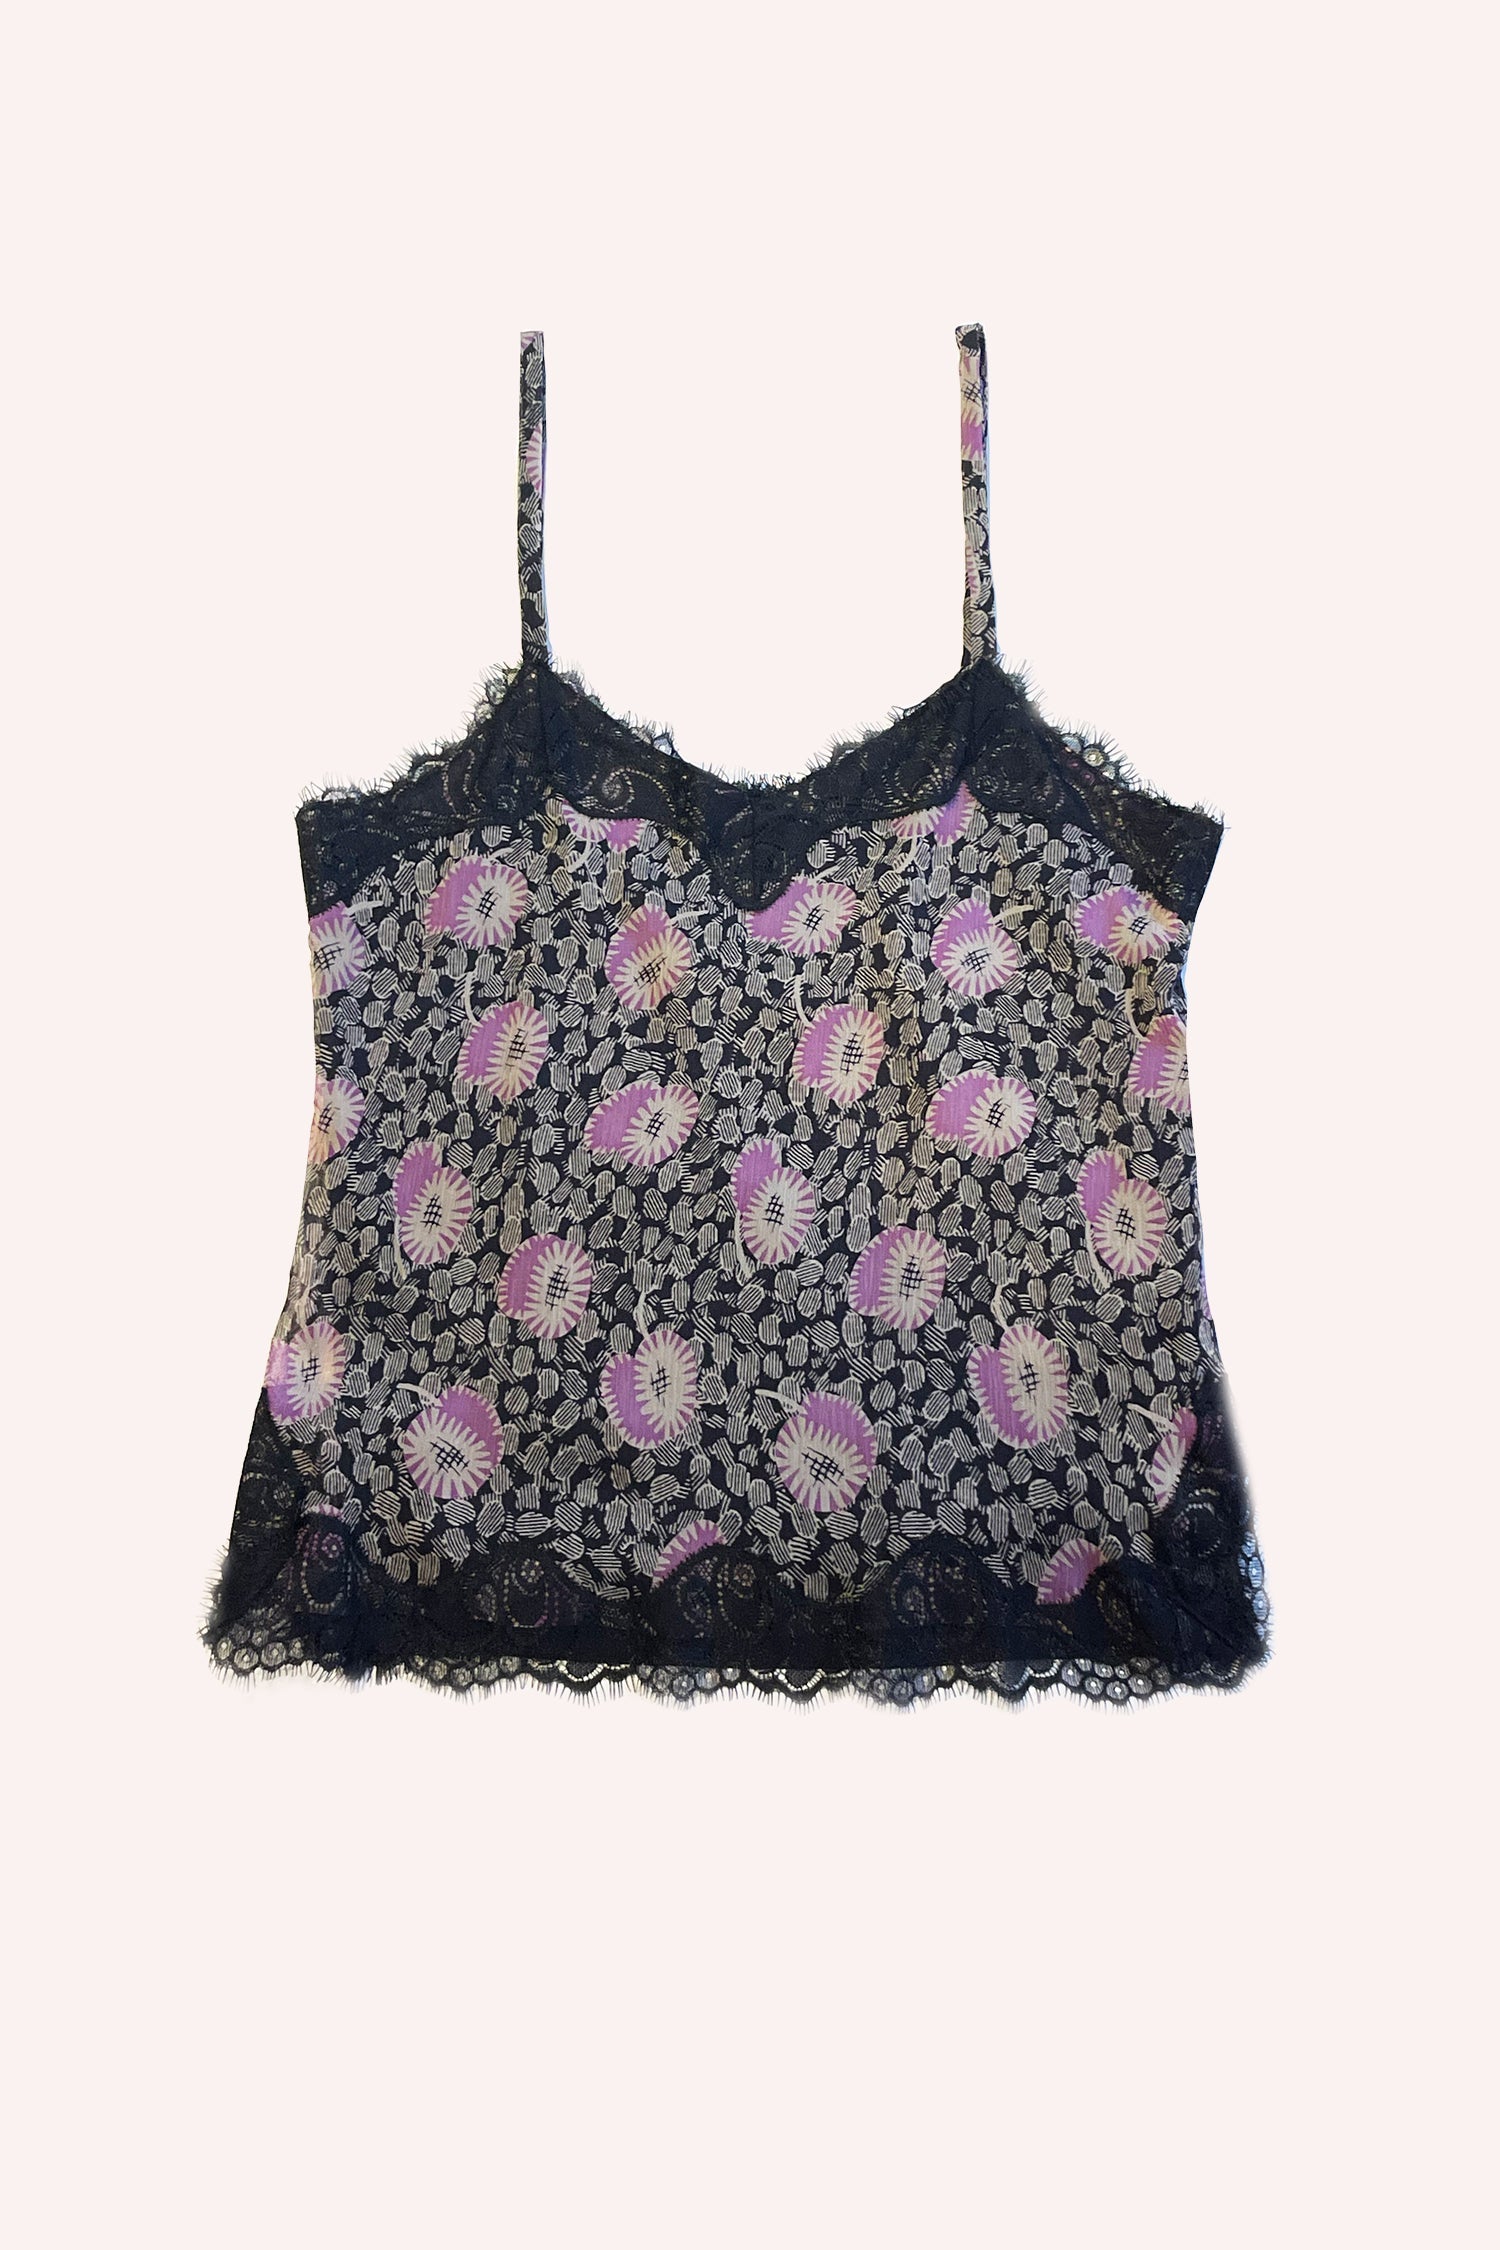 Etched Posies Slip Top – Anna Sui